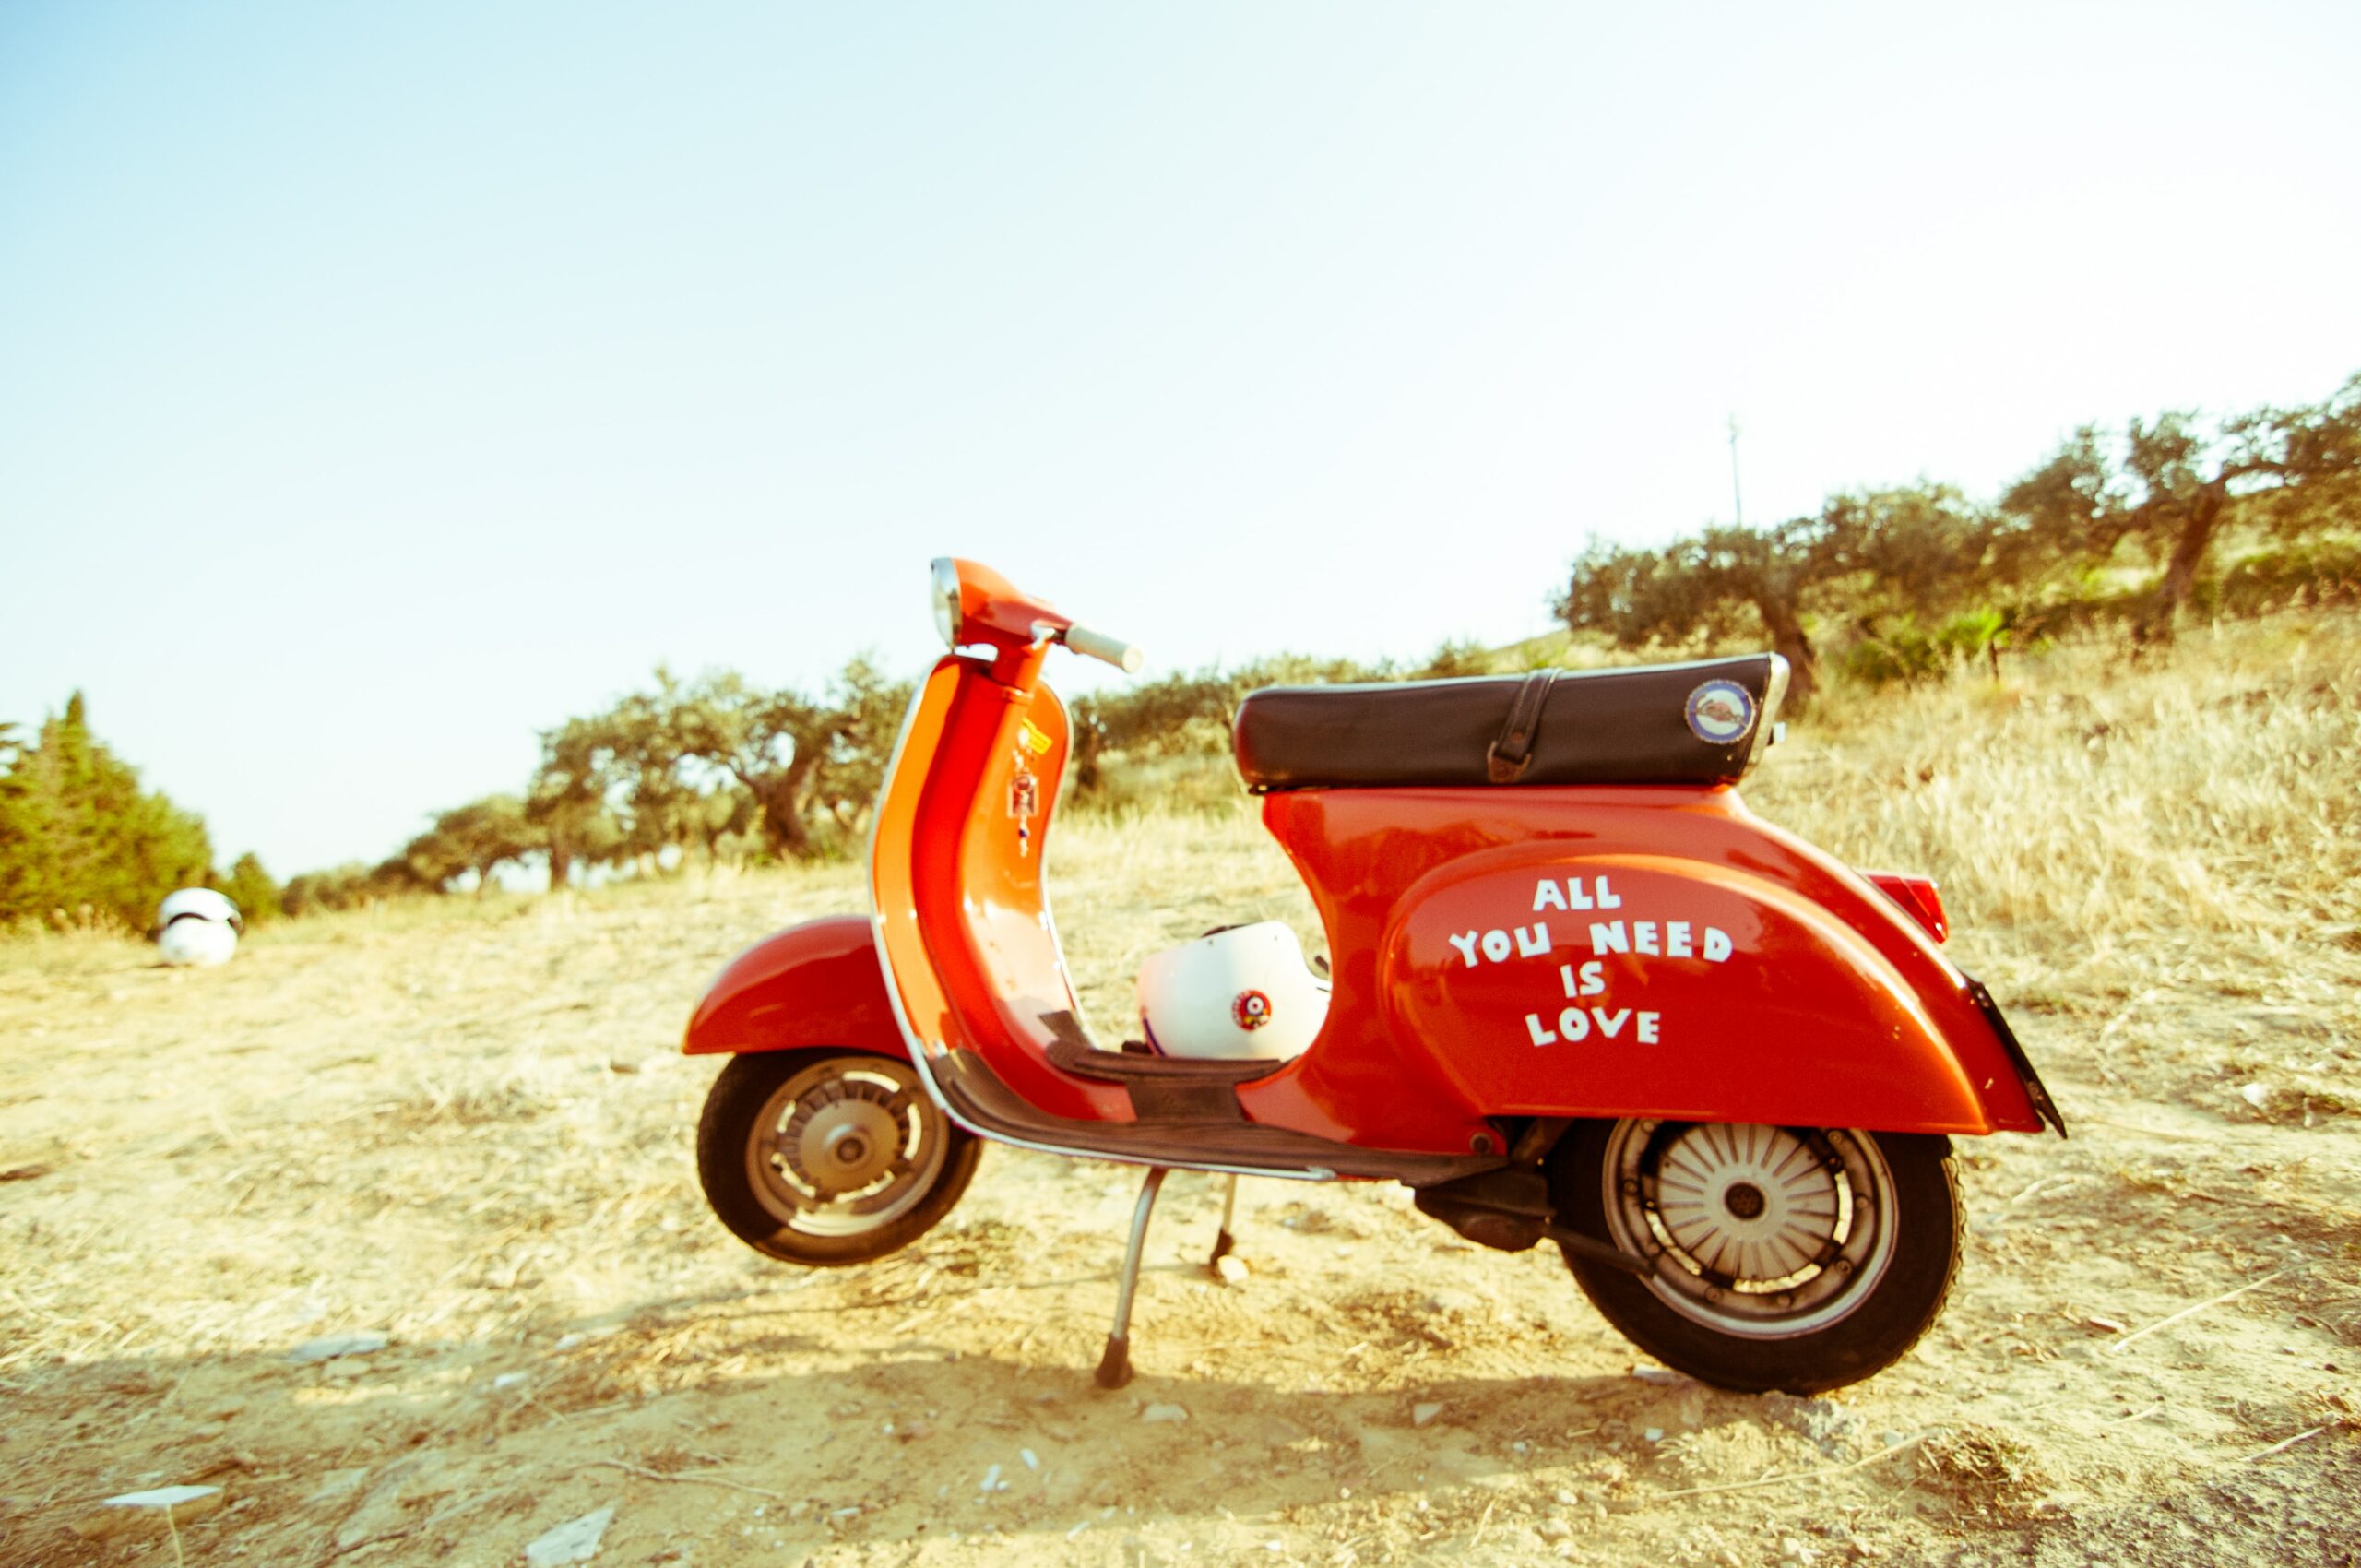 Red Vespa standing in a deserted area with a blue sky